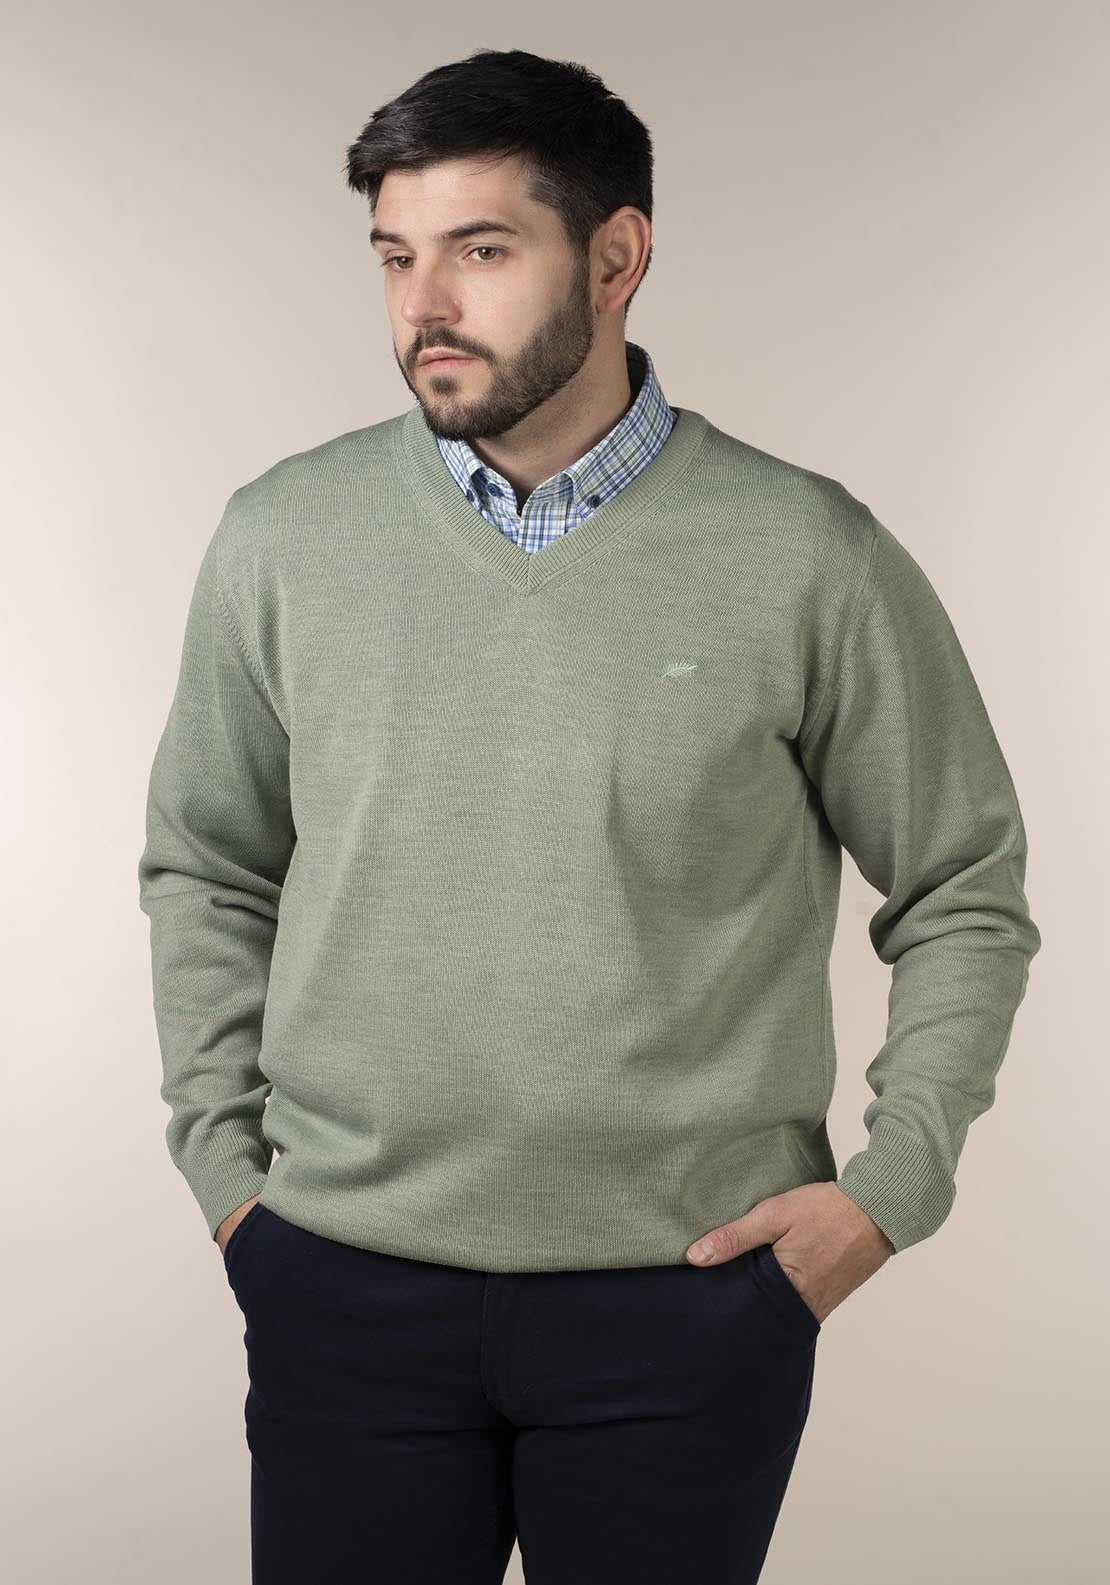 Yeats Mens 100% Cotton V-Neck Jumper 2 Shaws Department Stores